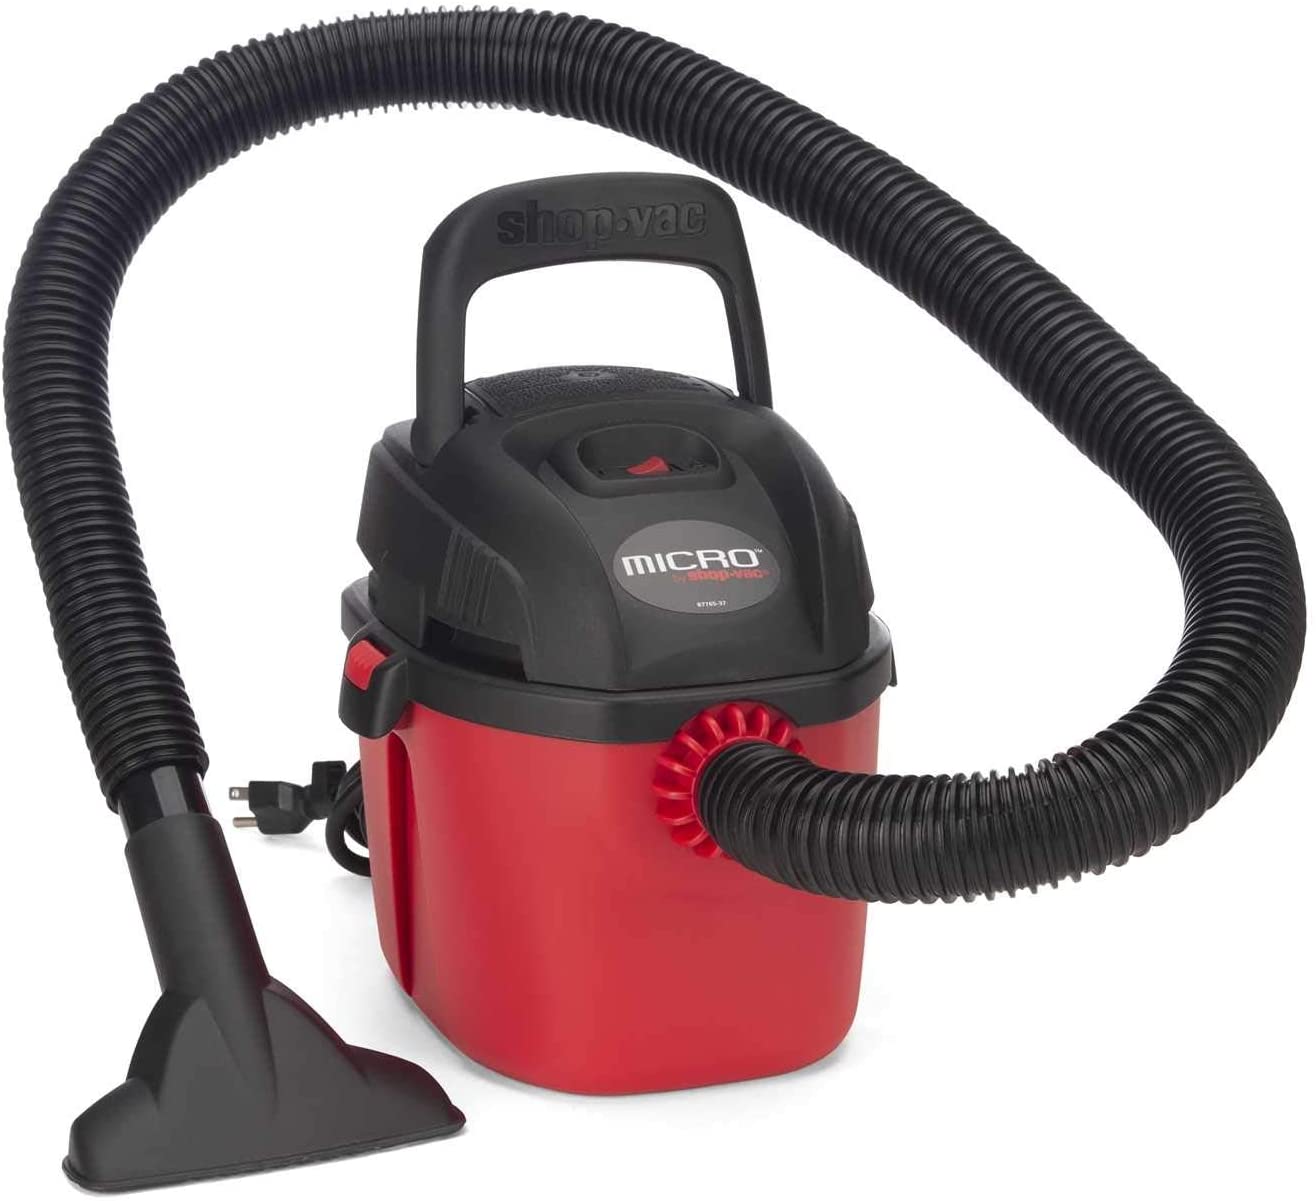 8 Best Shop Vac for Woodworking 2022 [Review & Buying Guide]